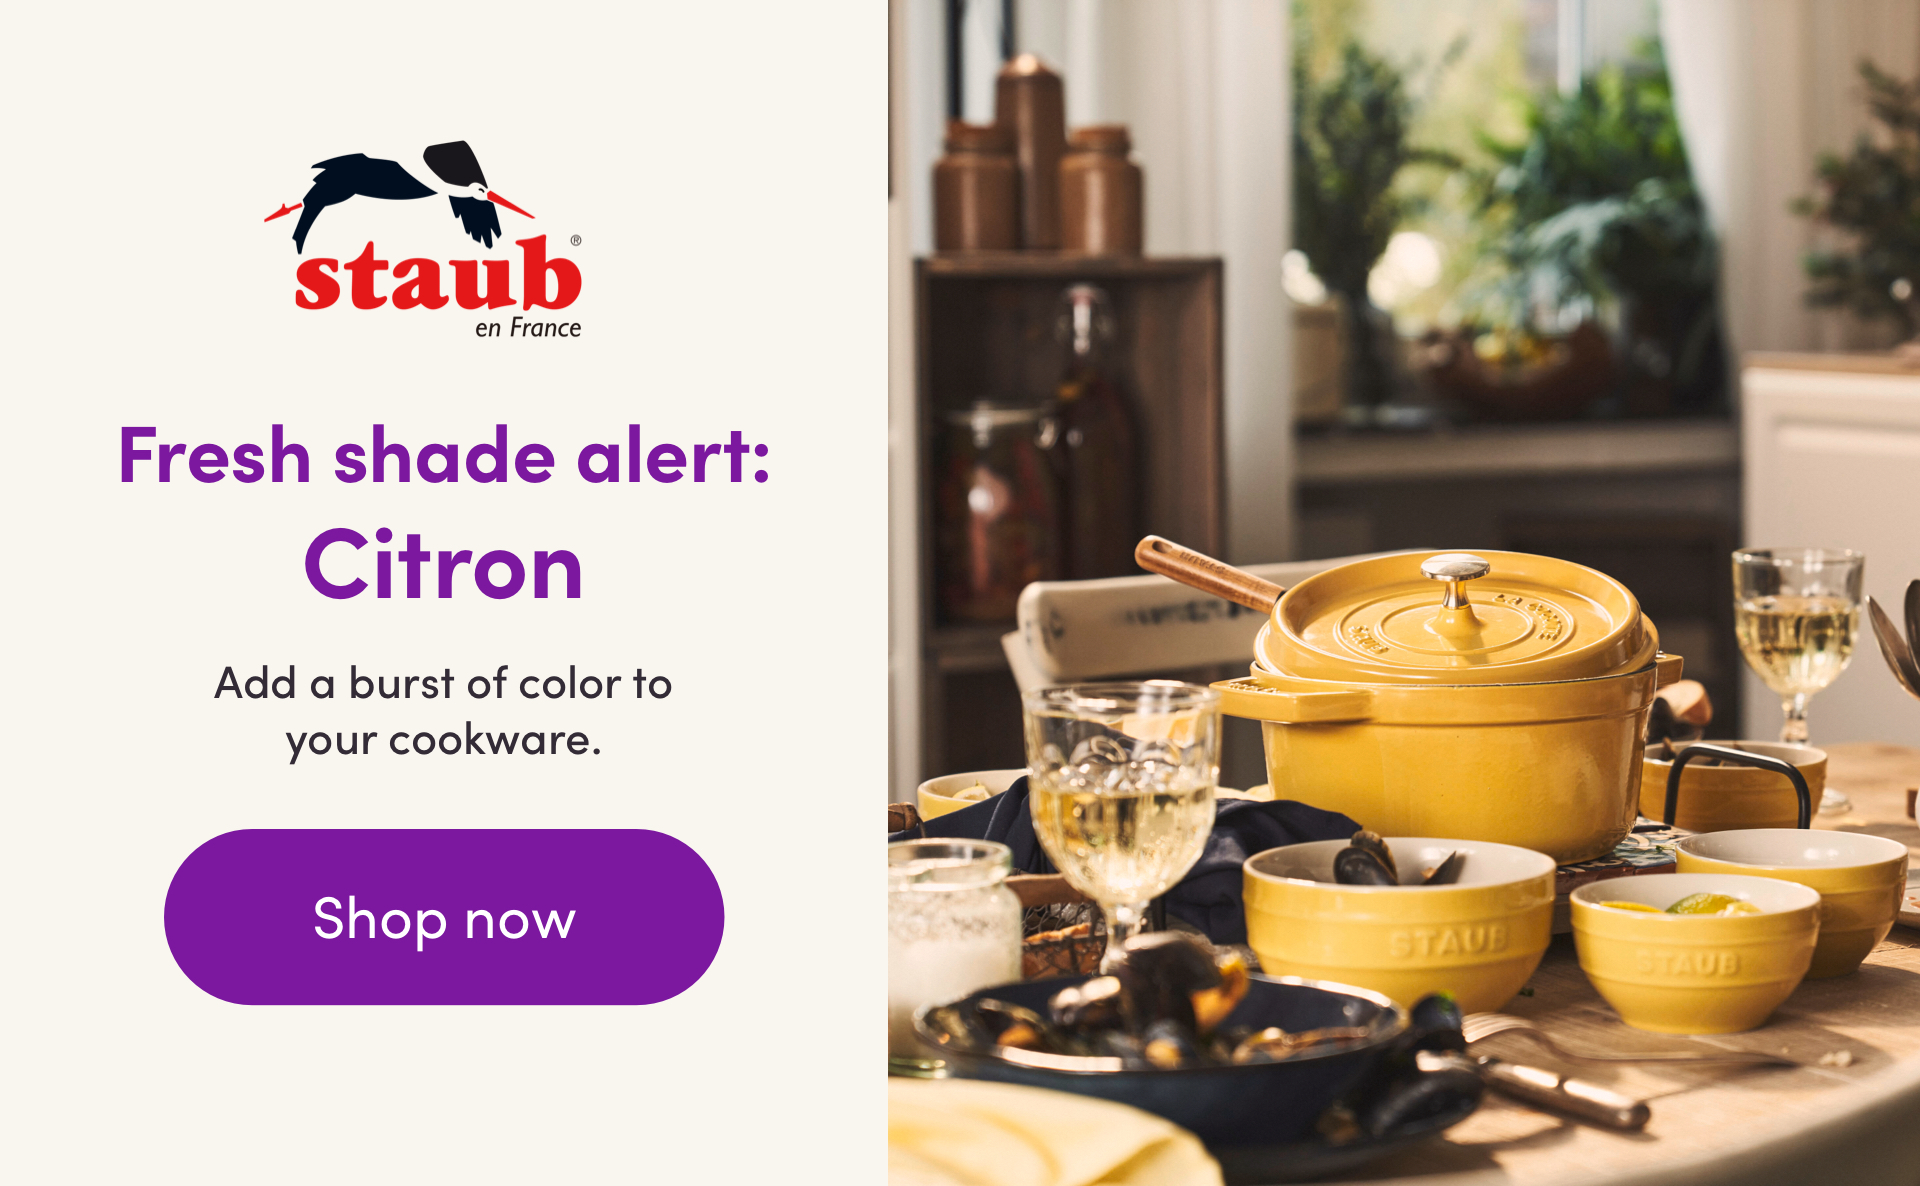 Staub. Fresh shade alert: Citron. Add a burst of color to your cookware. Shop now